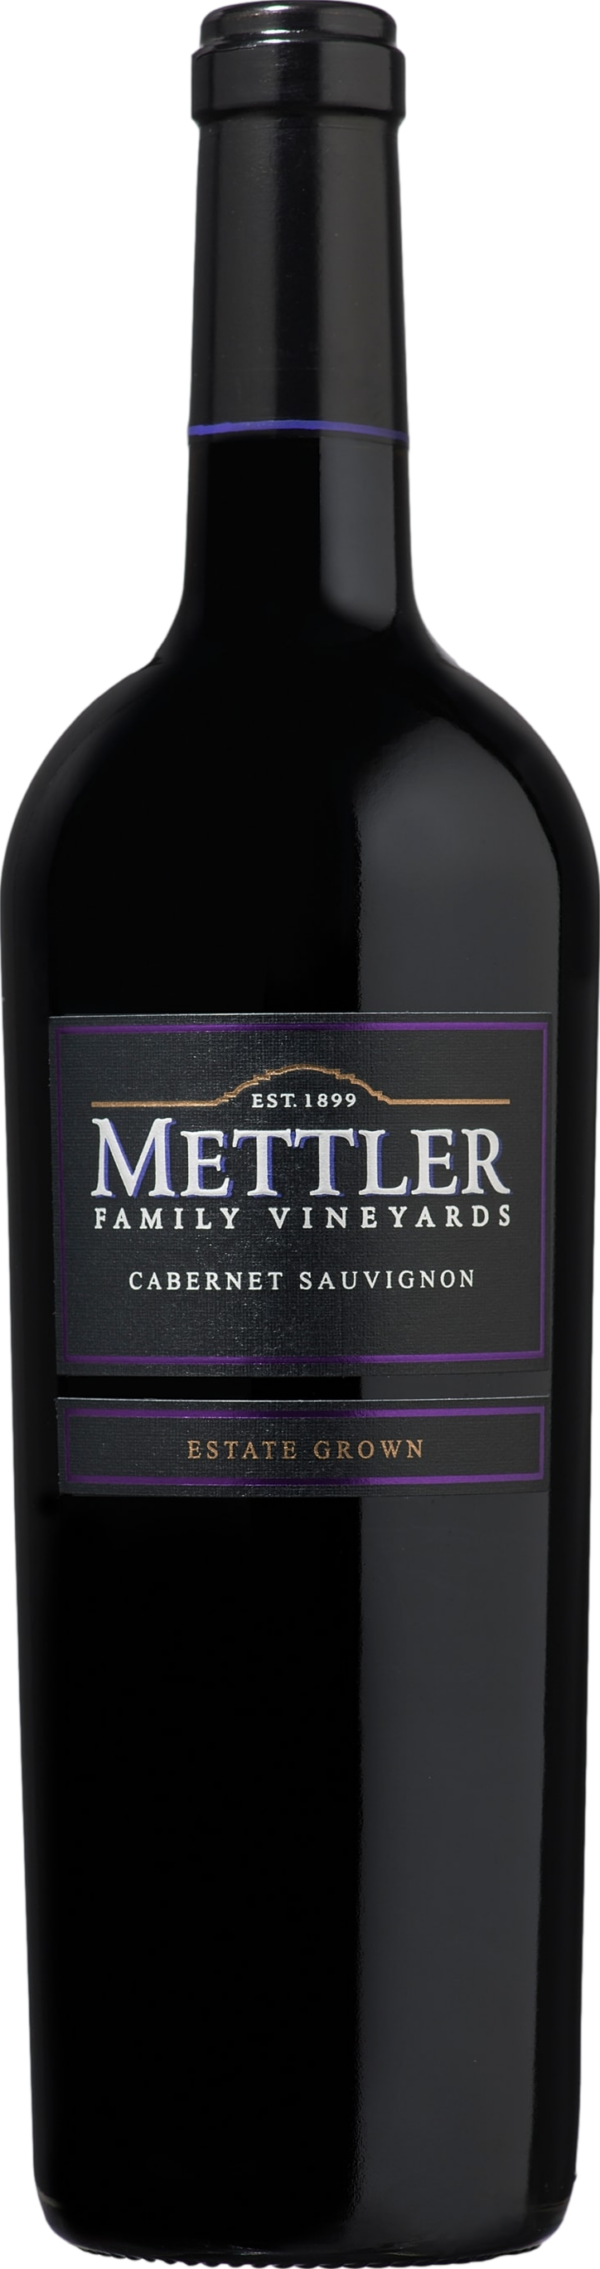 Product image of Mettler Cabernet Sauvignon 2018 from 8wines